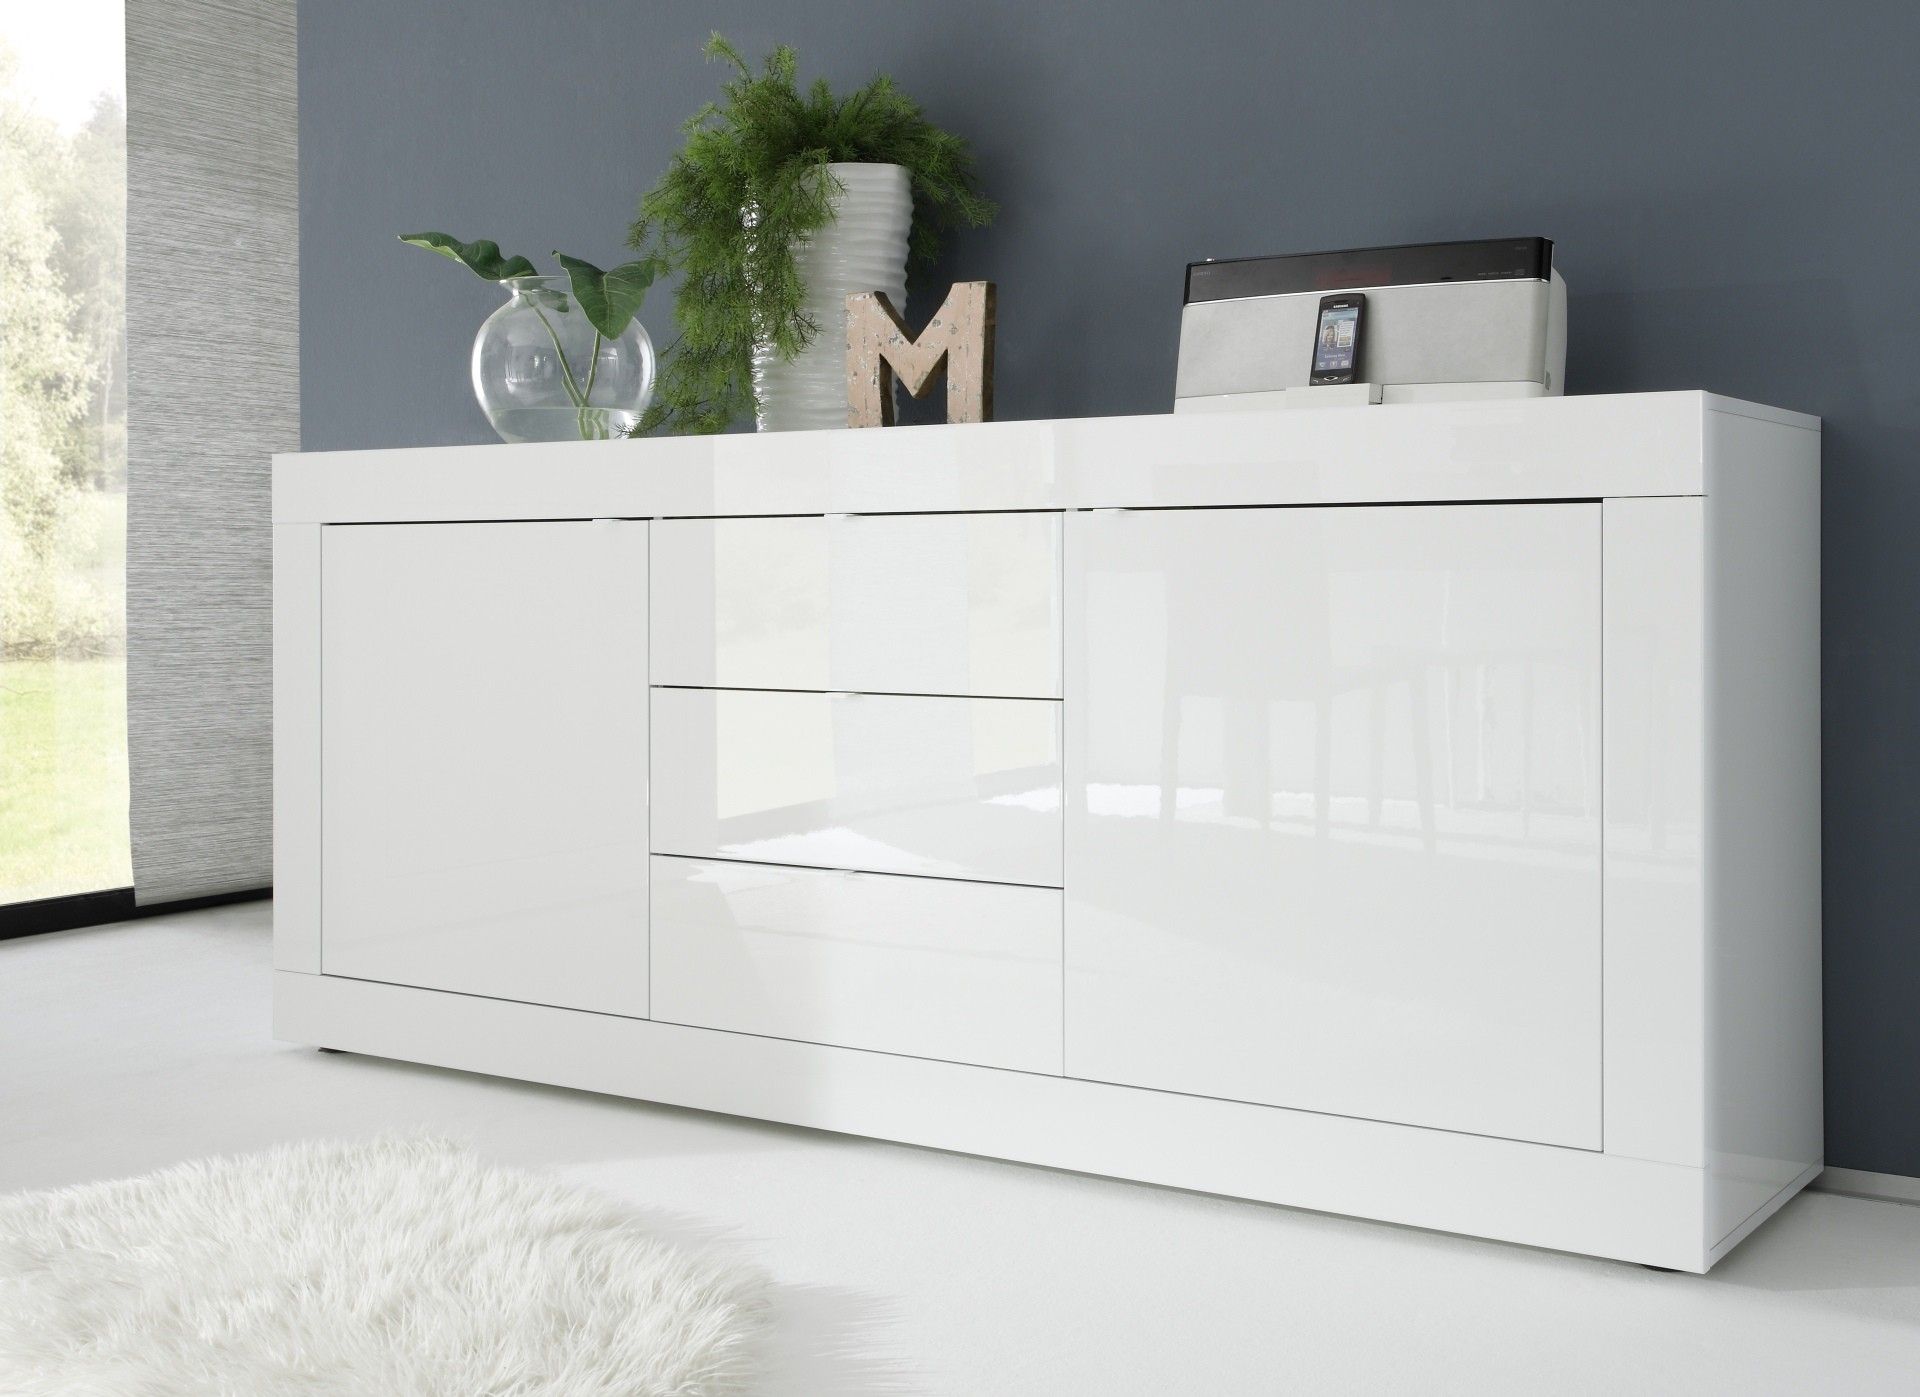 Dolcevita Ii White Gloss Sideboard – Sideboards (1234) – Sena Home Furniture With Regard To White Sideboards For Living Room (View 6 of 15)